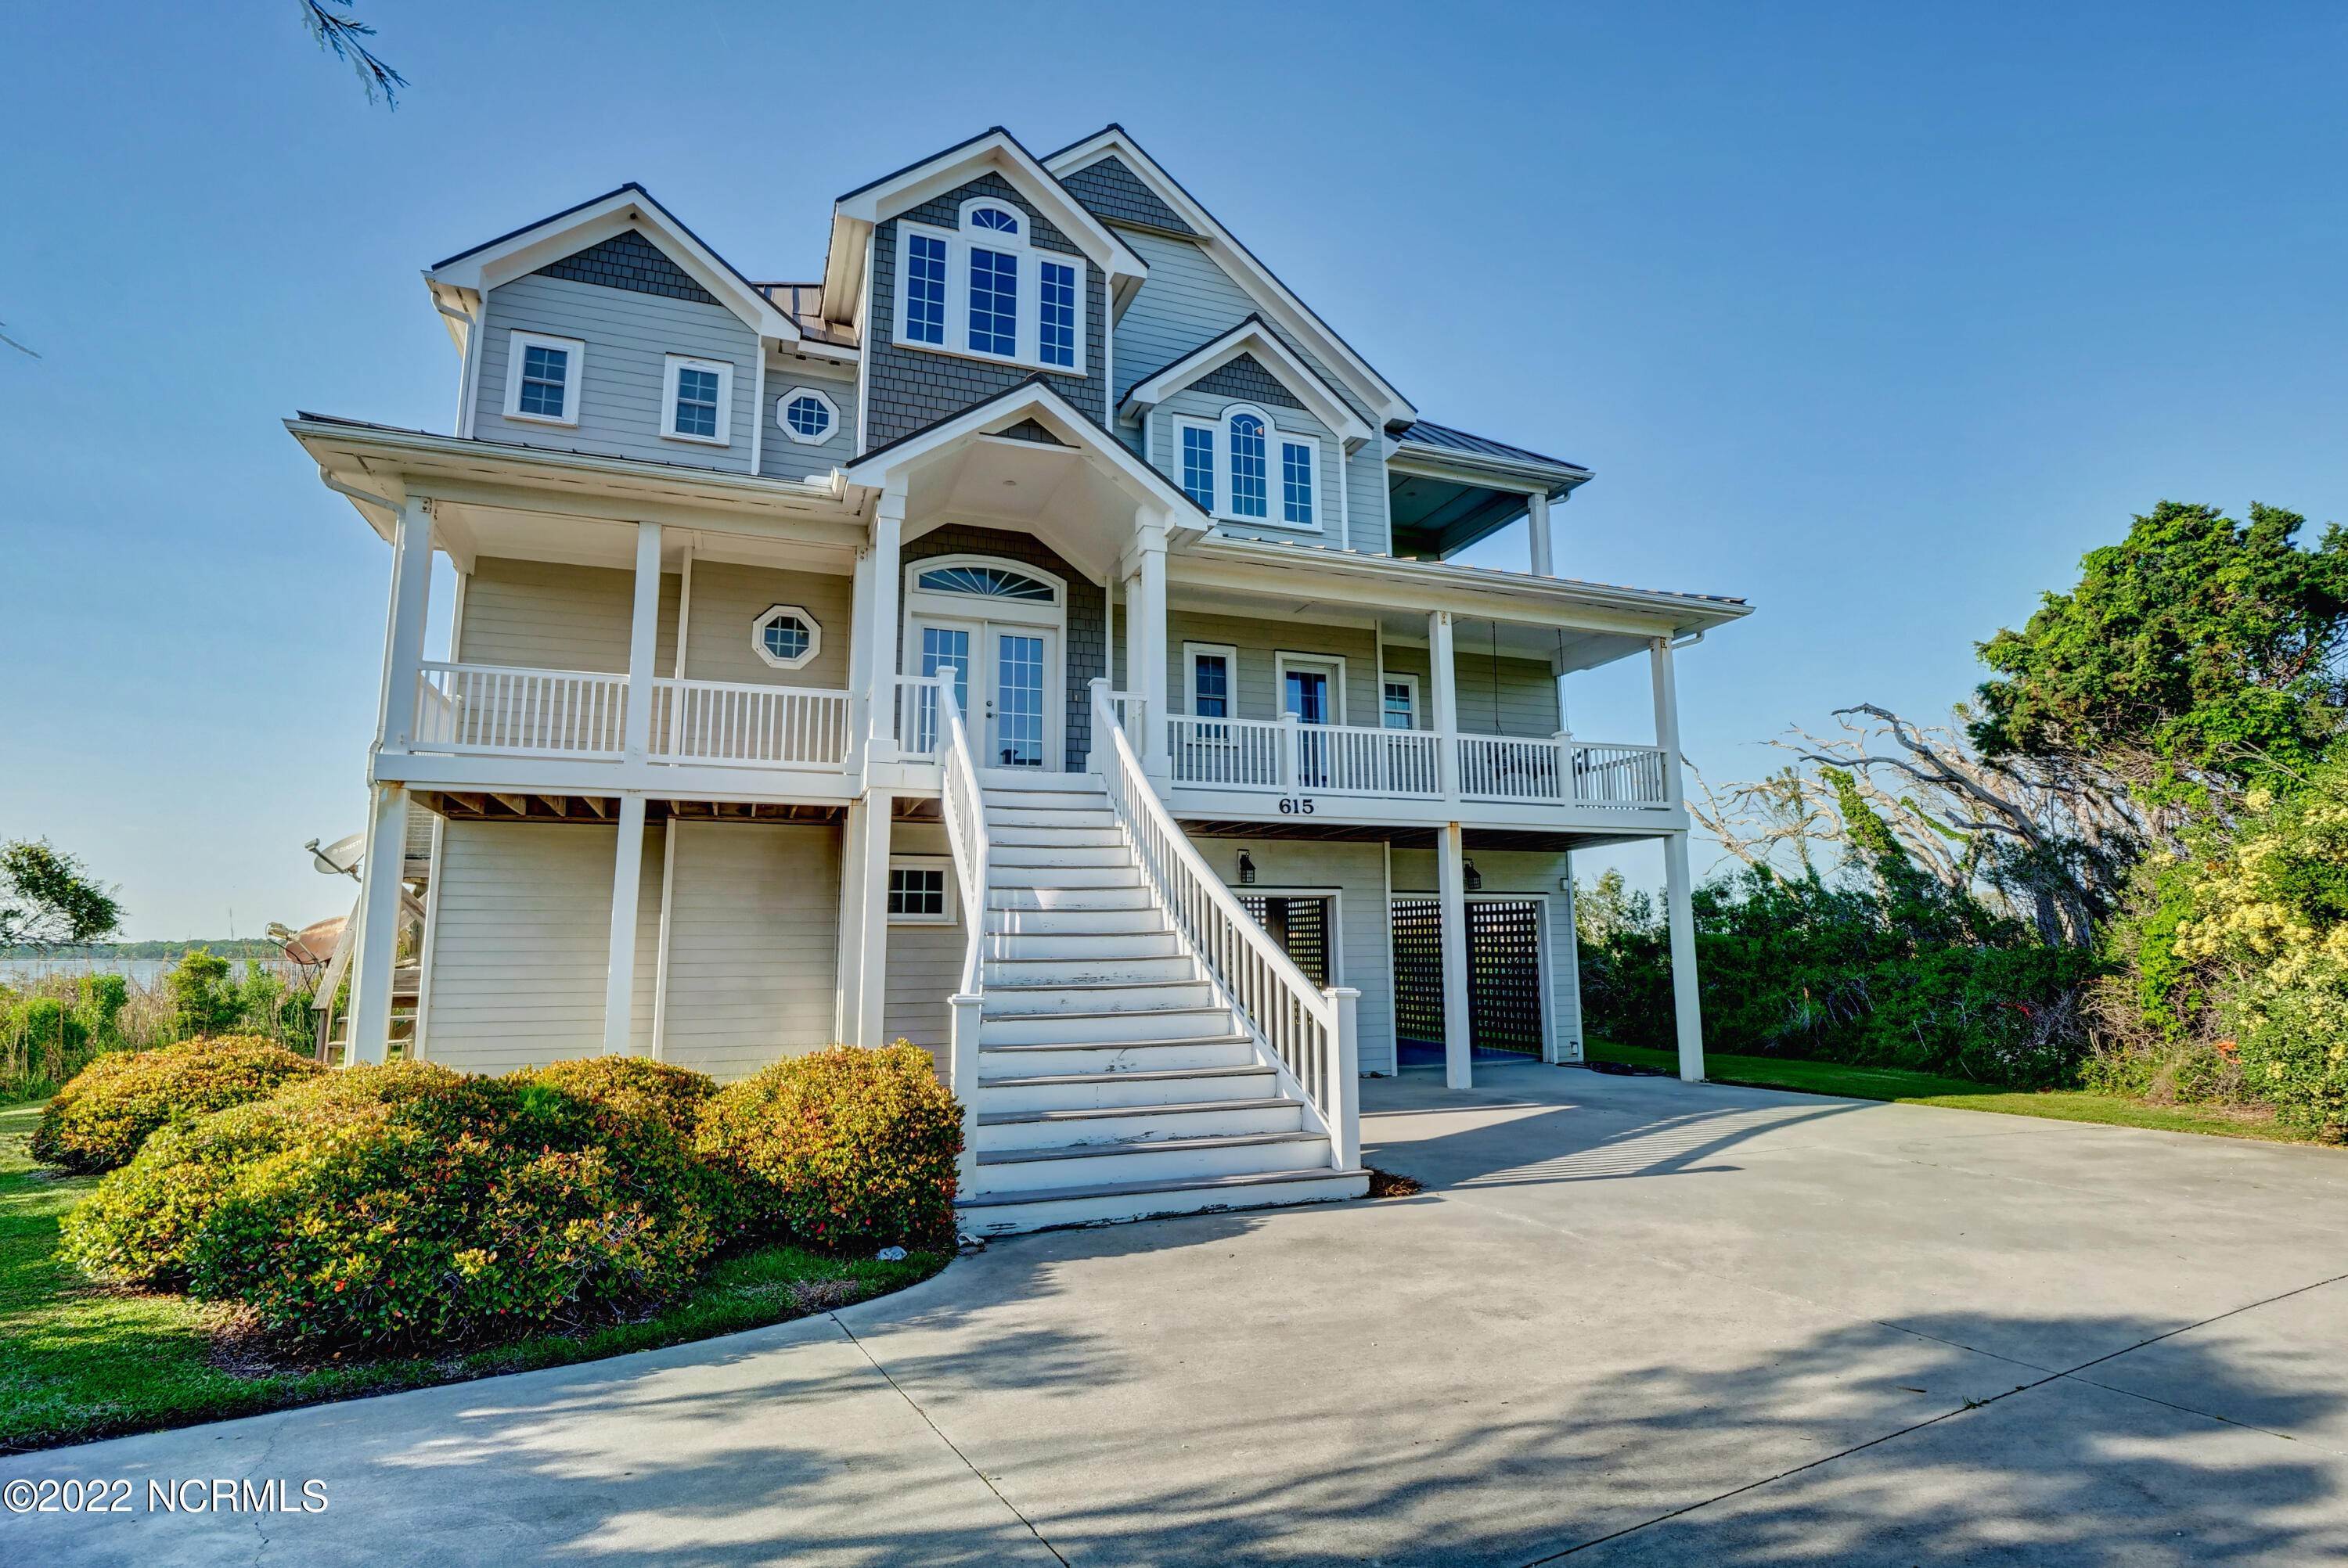 Single Family Homes for Sale at 615 New River Inlet Road N Topsail Beach, North Carolina 28460 United States